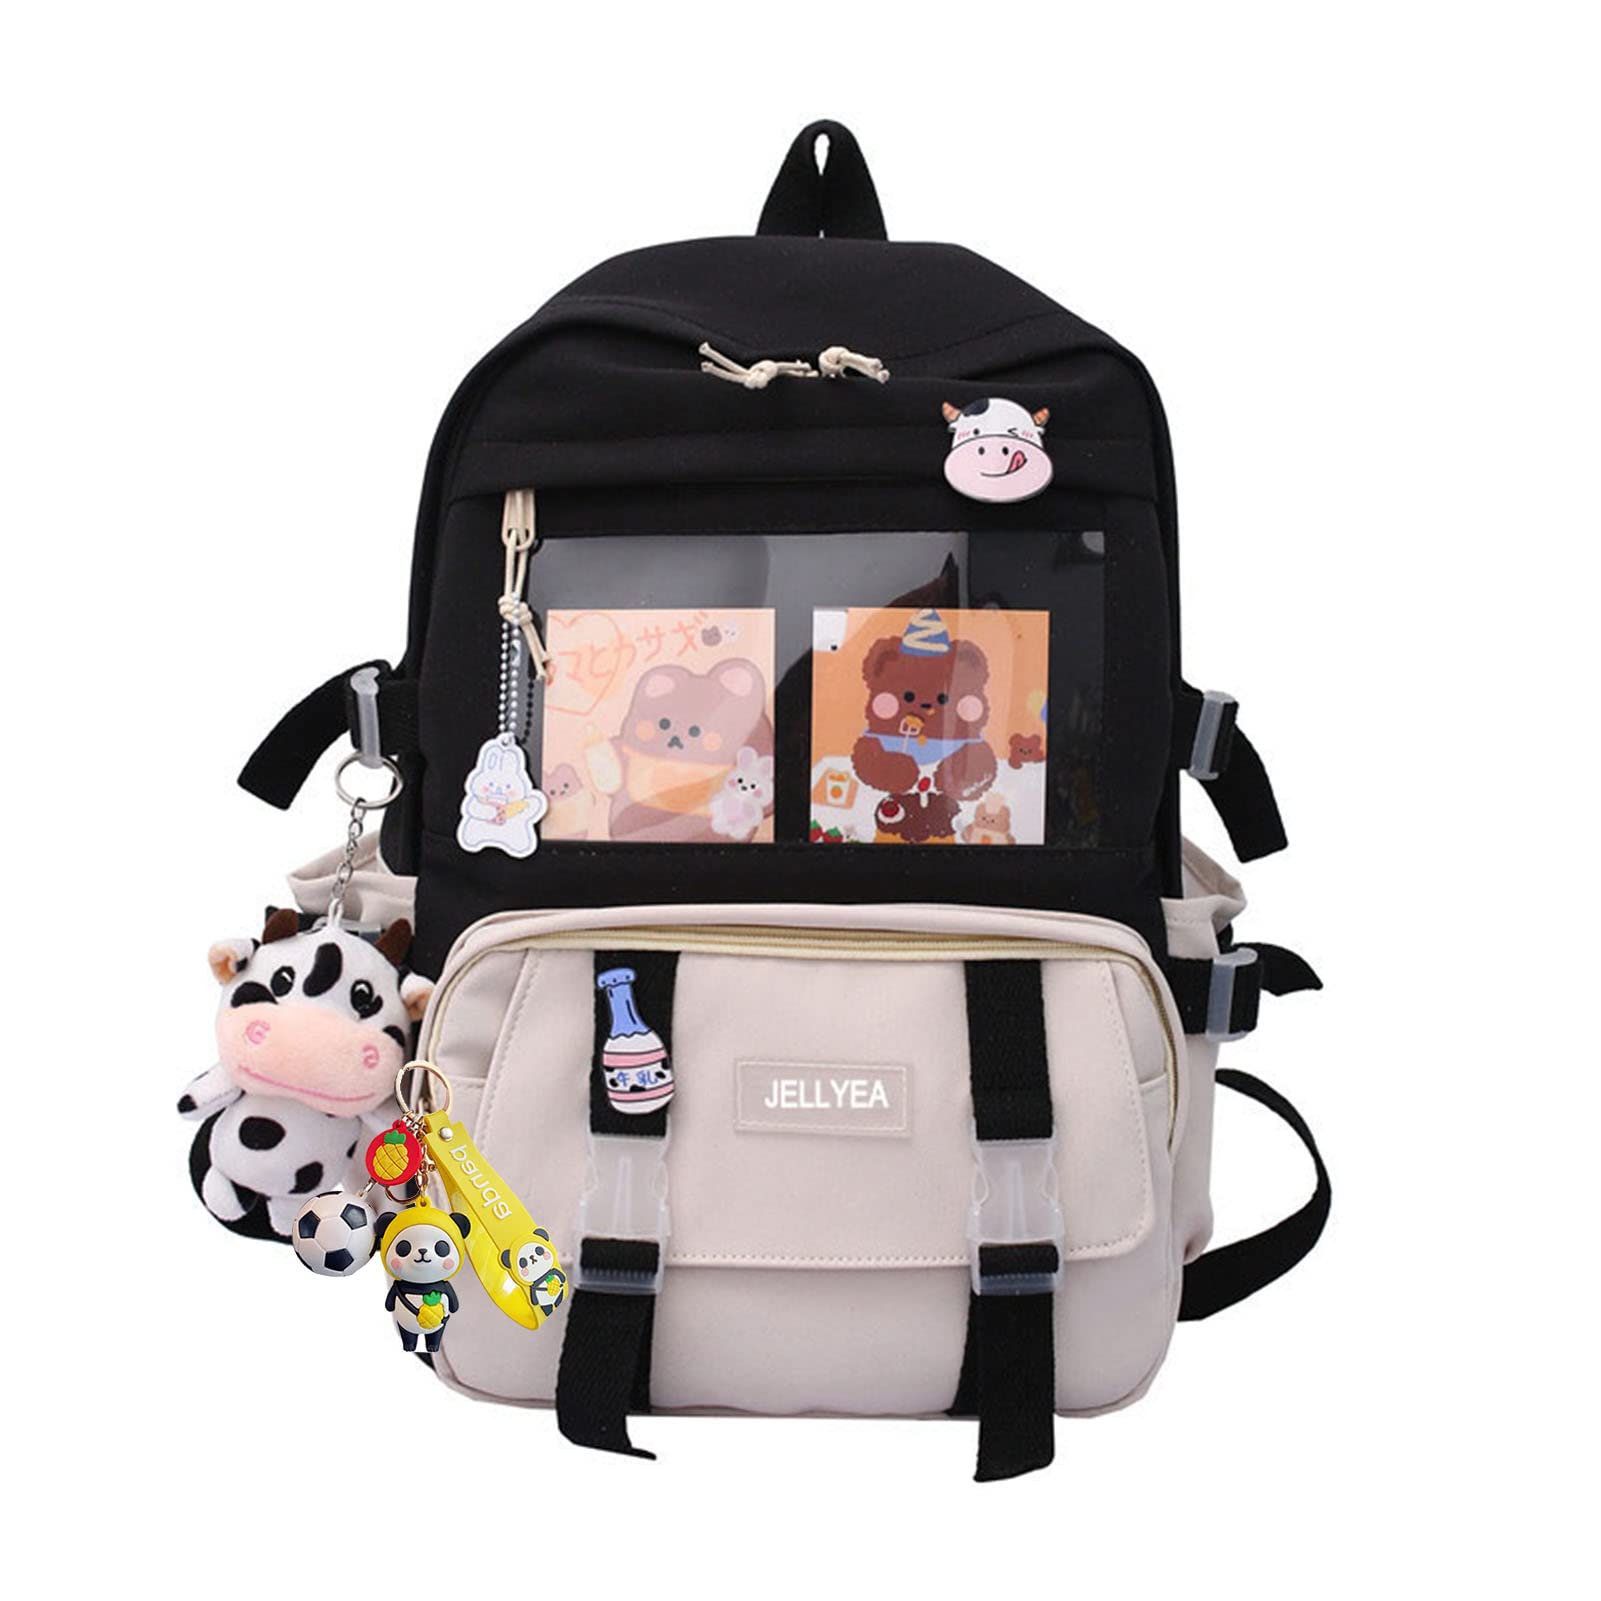 JELLYEA Kawaii School Backpack for Girls with Milk Cow Keychain and Cute Pin School Bookbag Teens Backpack Middle Elementary